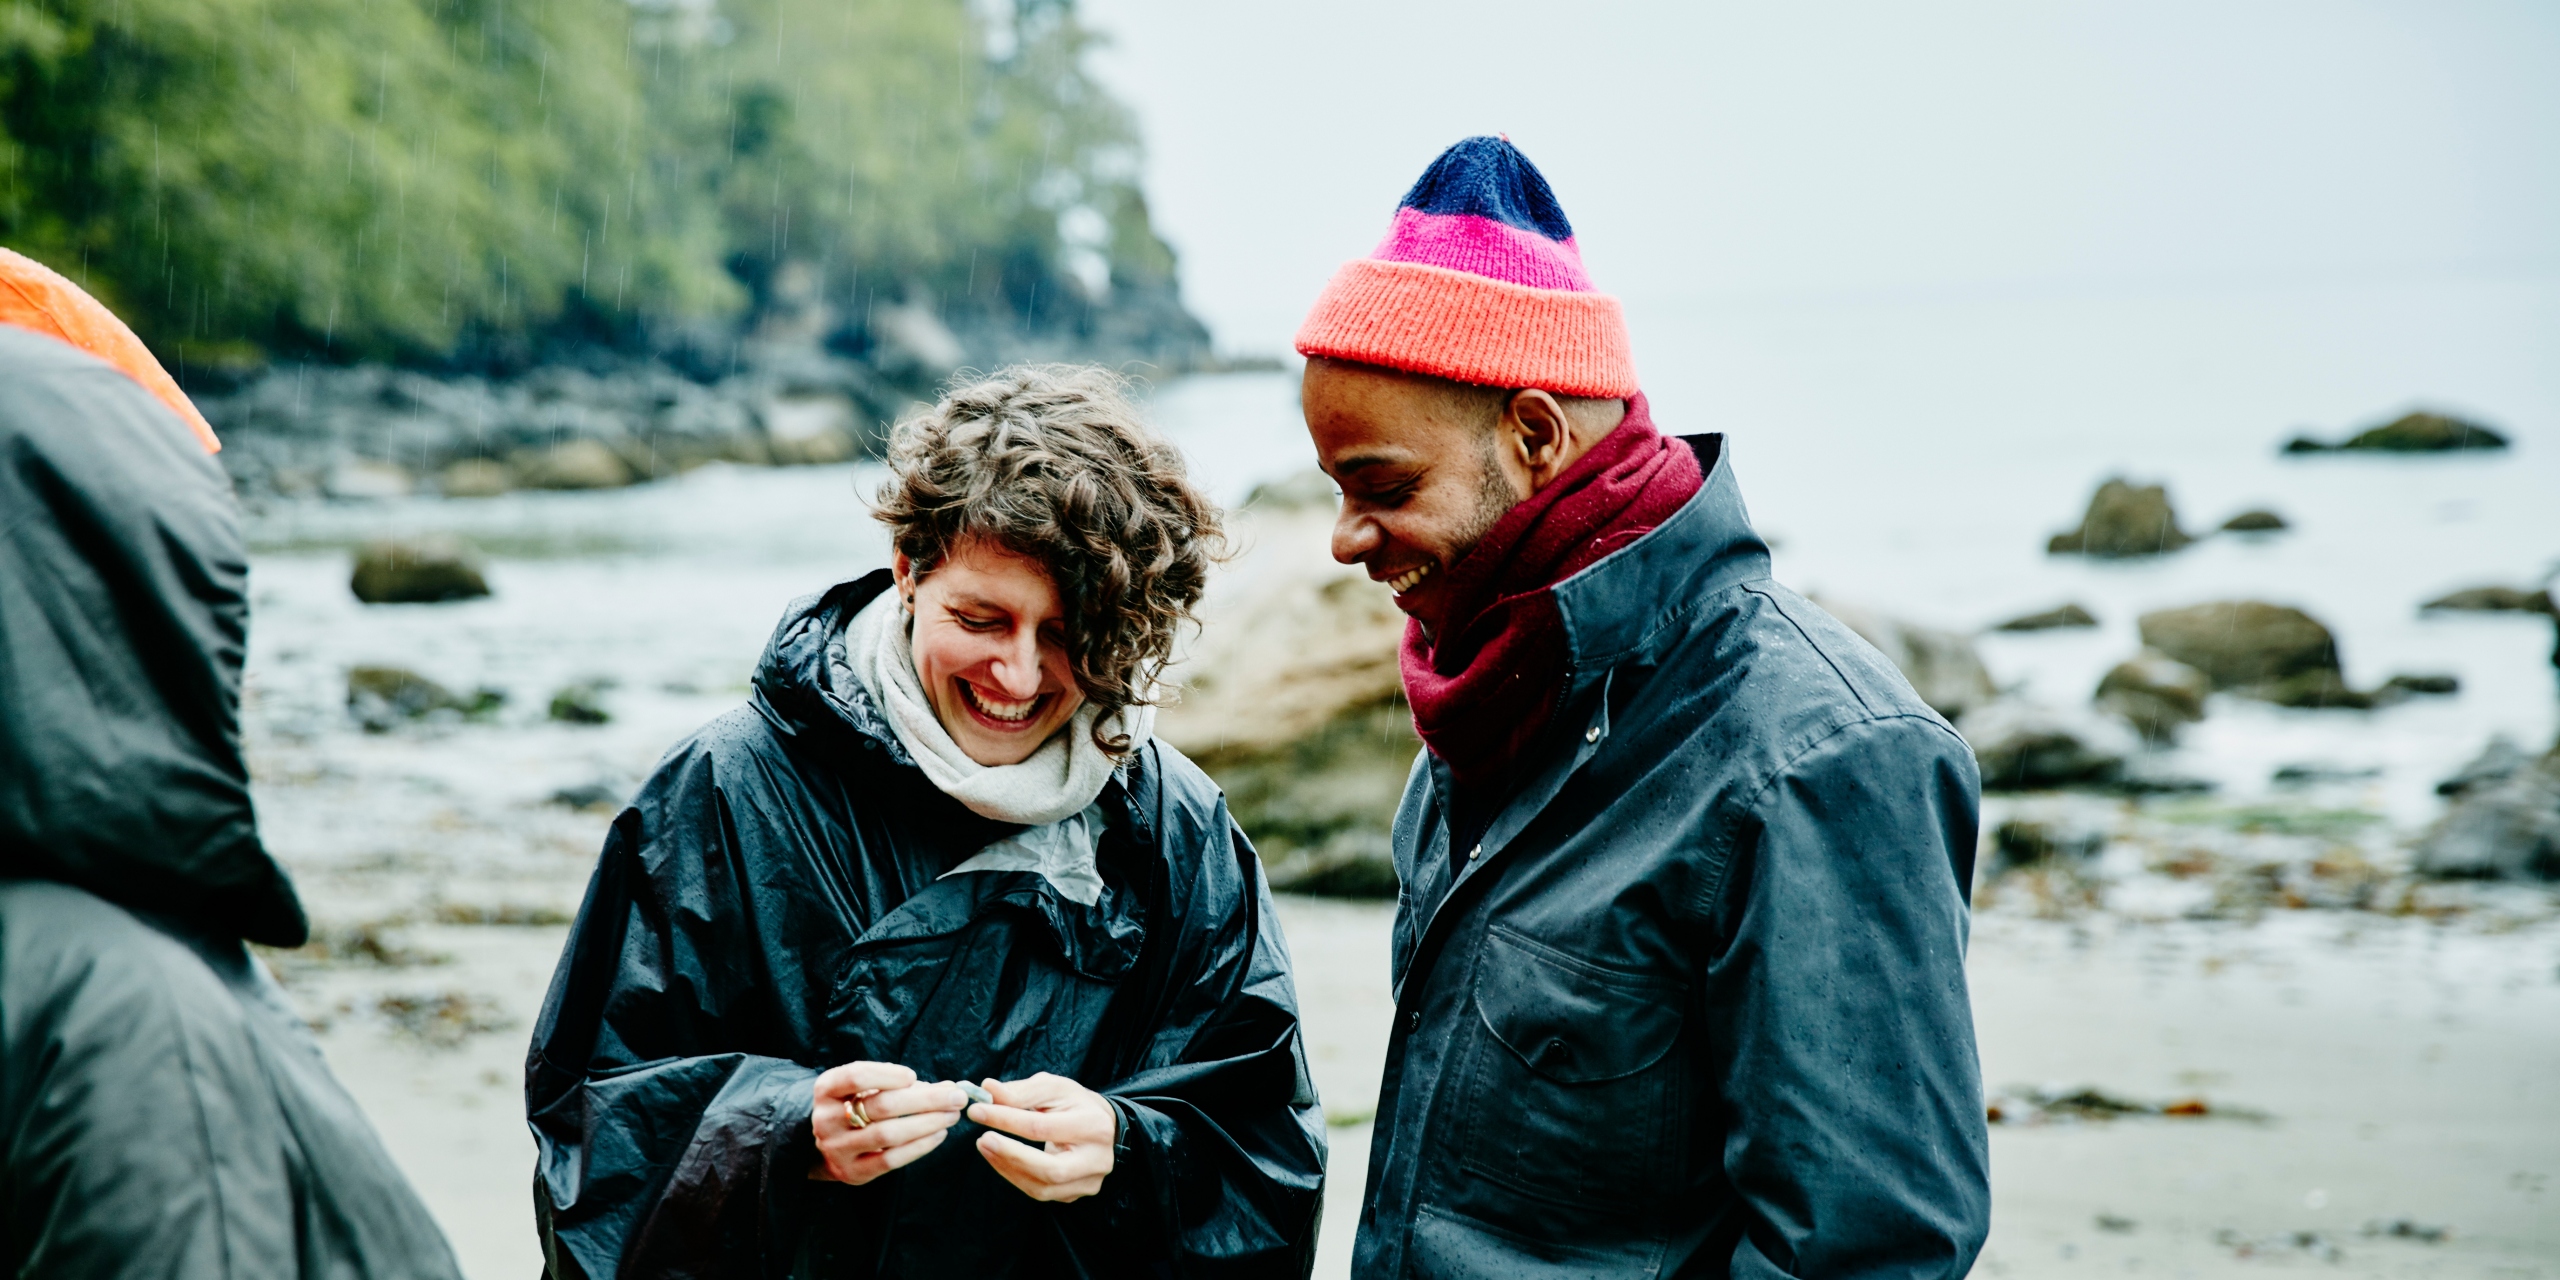 Smiling couple looking at rock found on beach during walk in rain